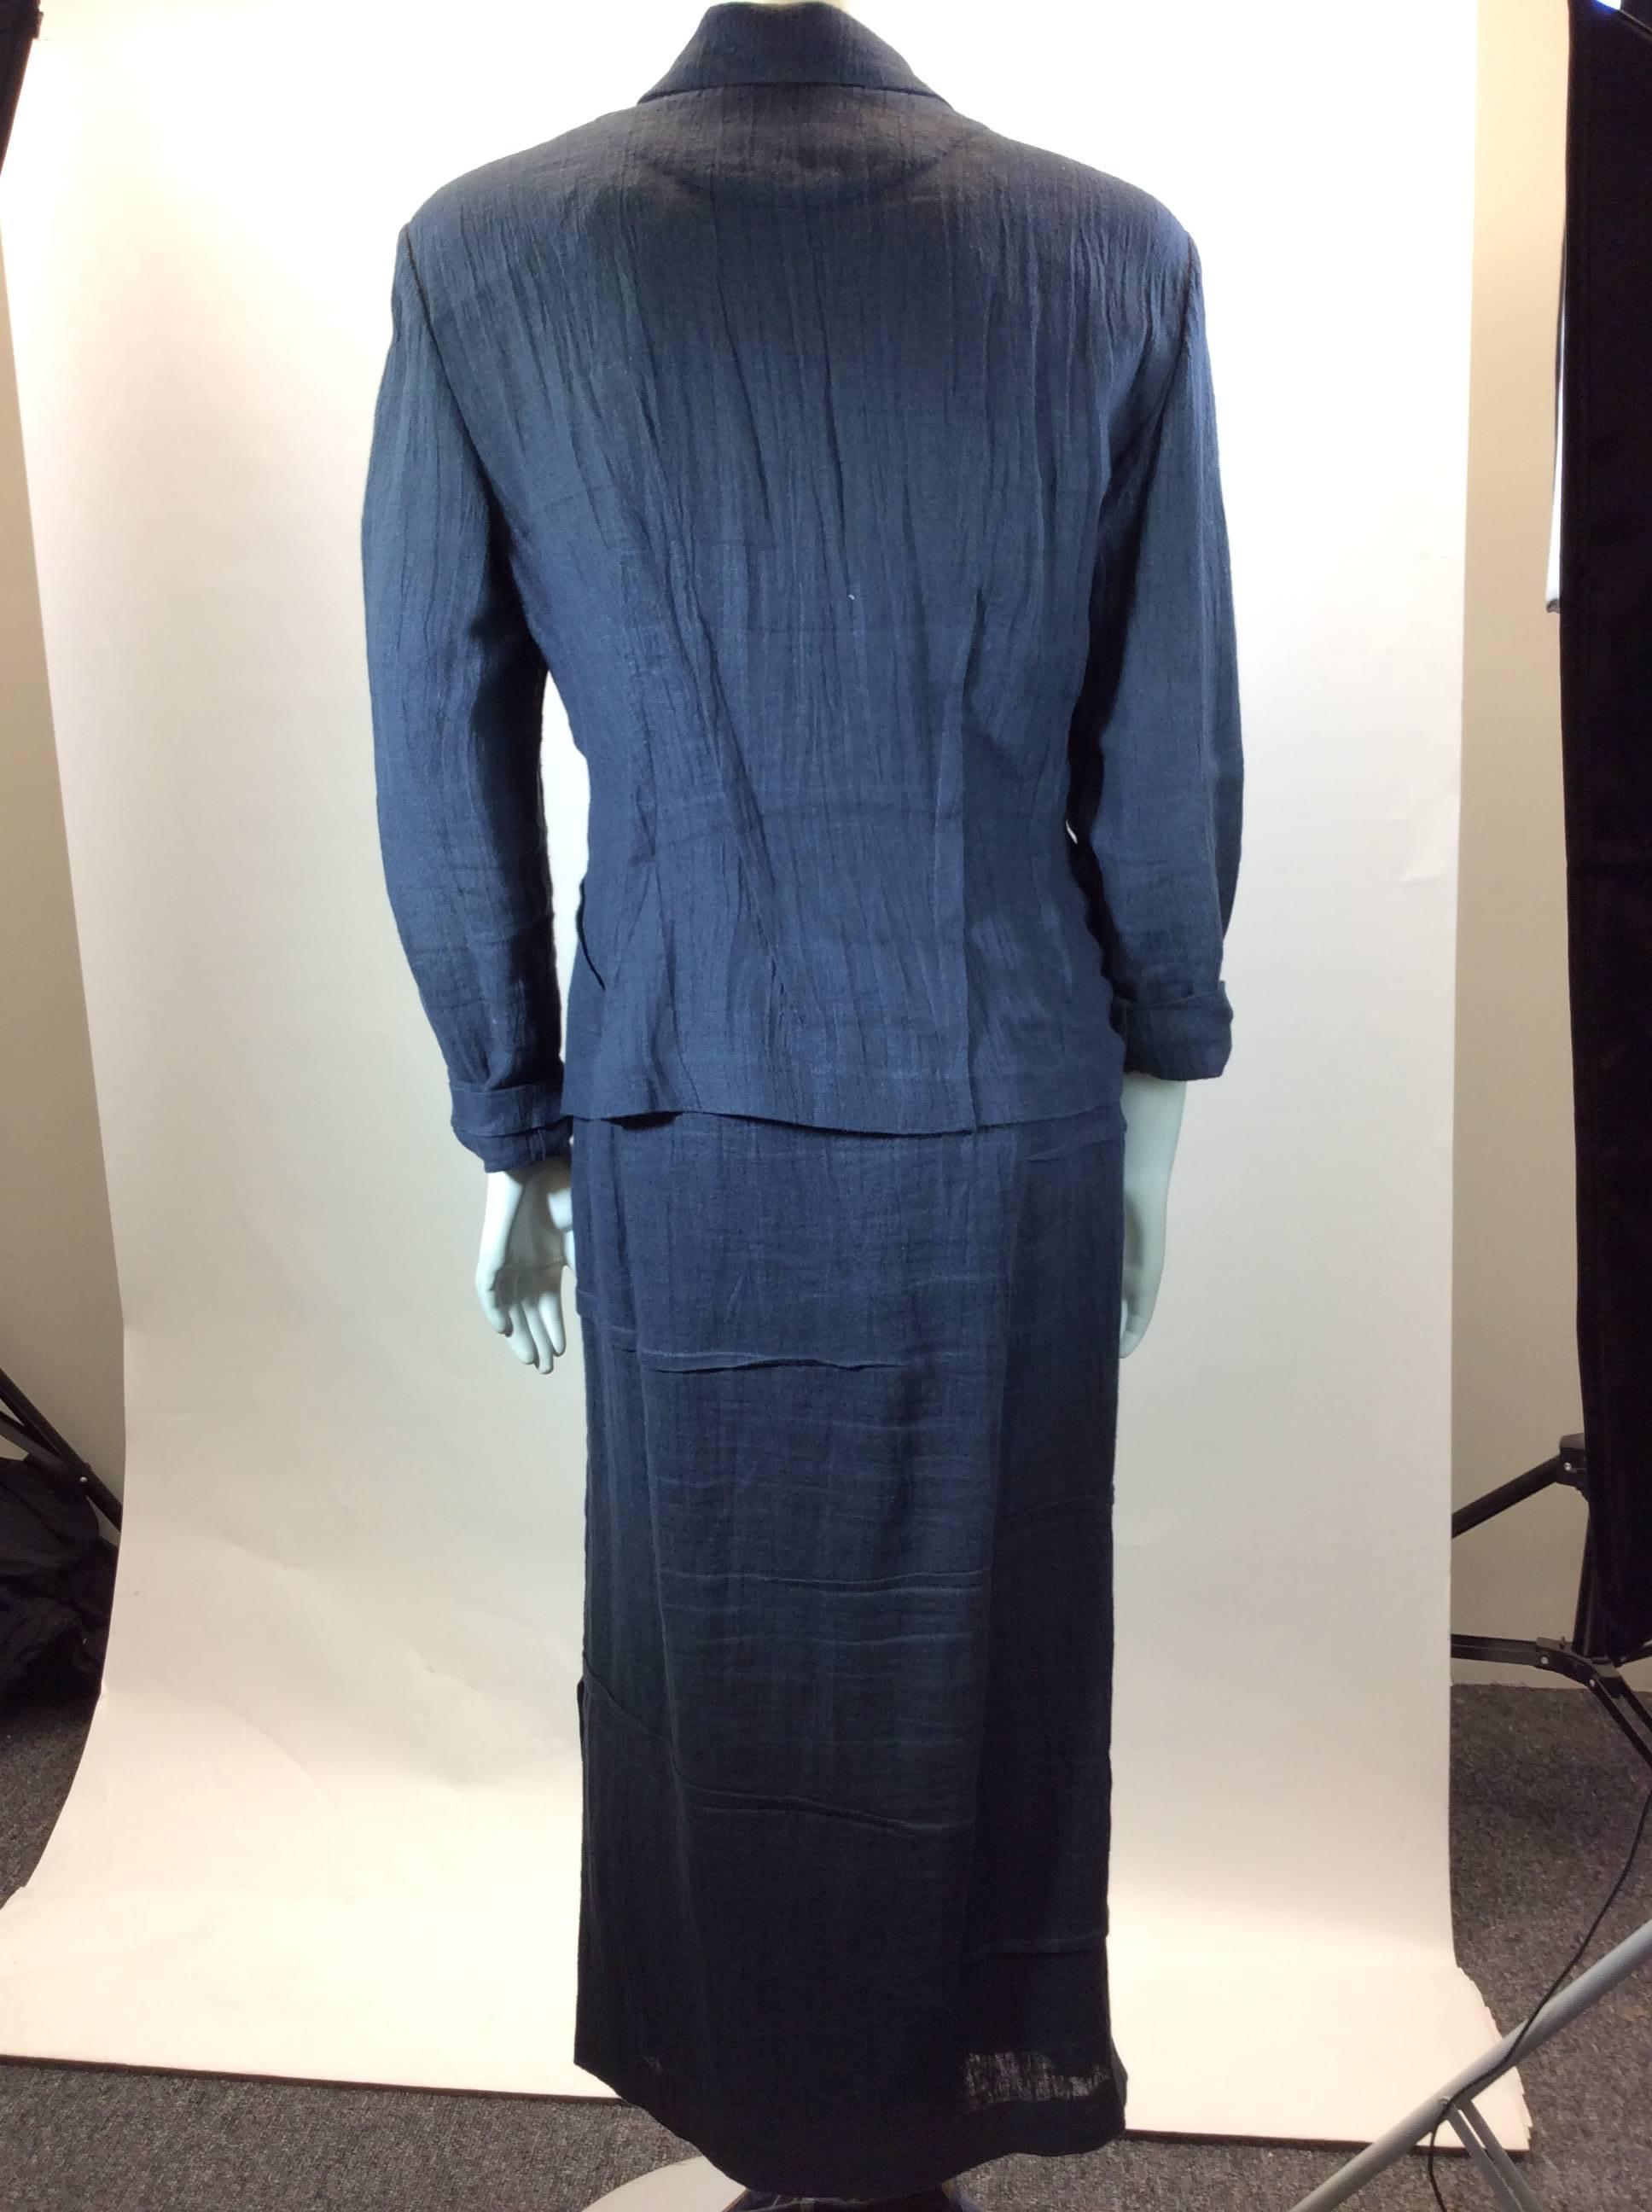 Matsuda Grey Linen Jacket and Long Skirt Set In Excellent Condition For Sale In Narberth, PA